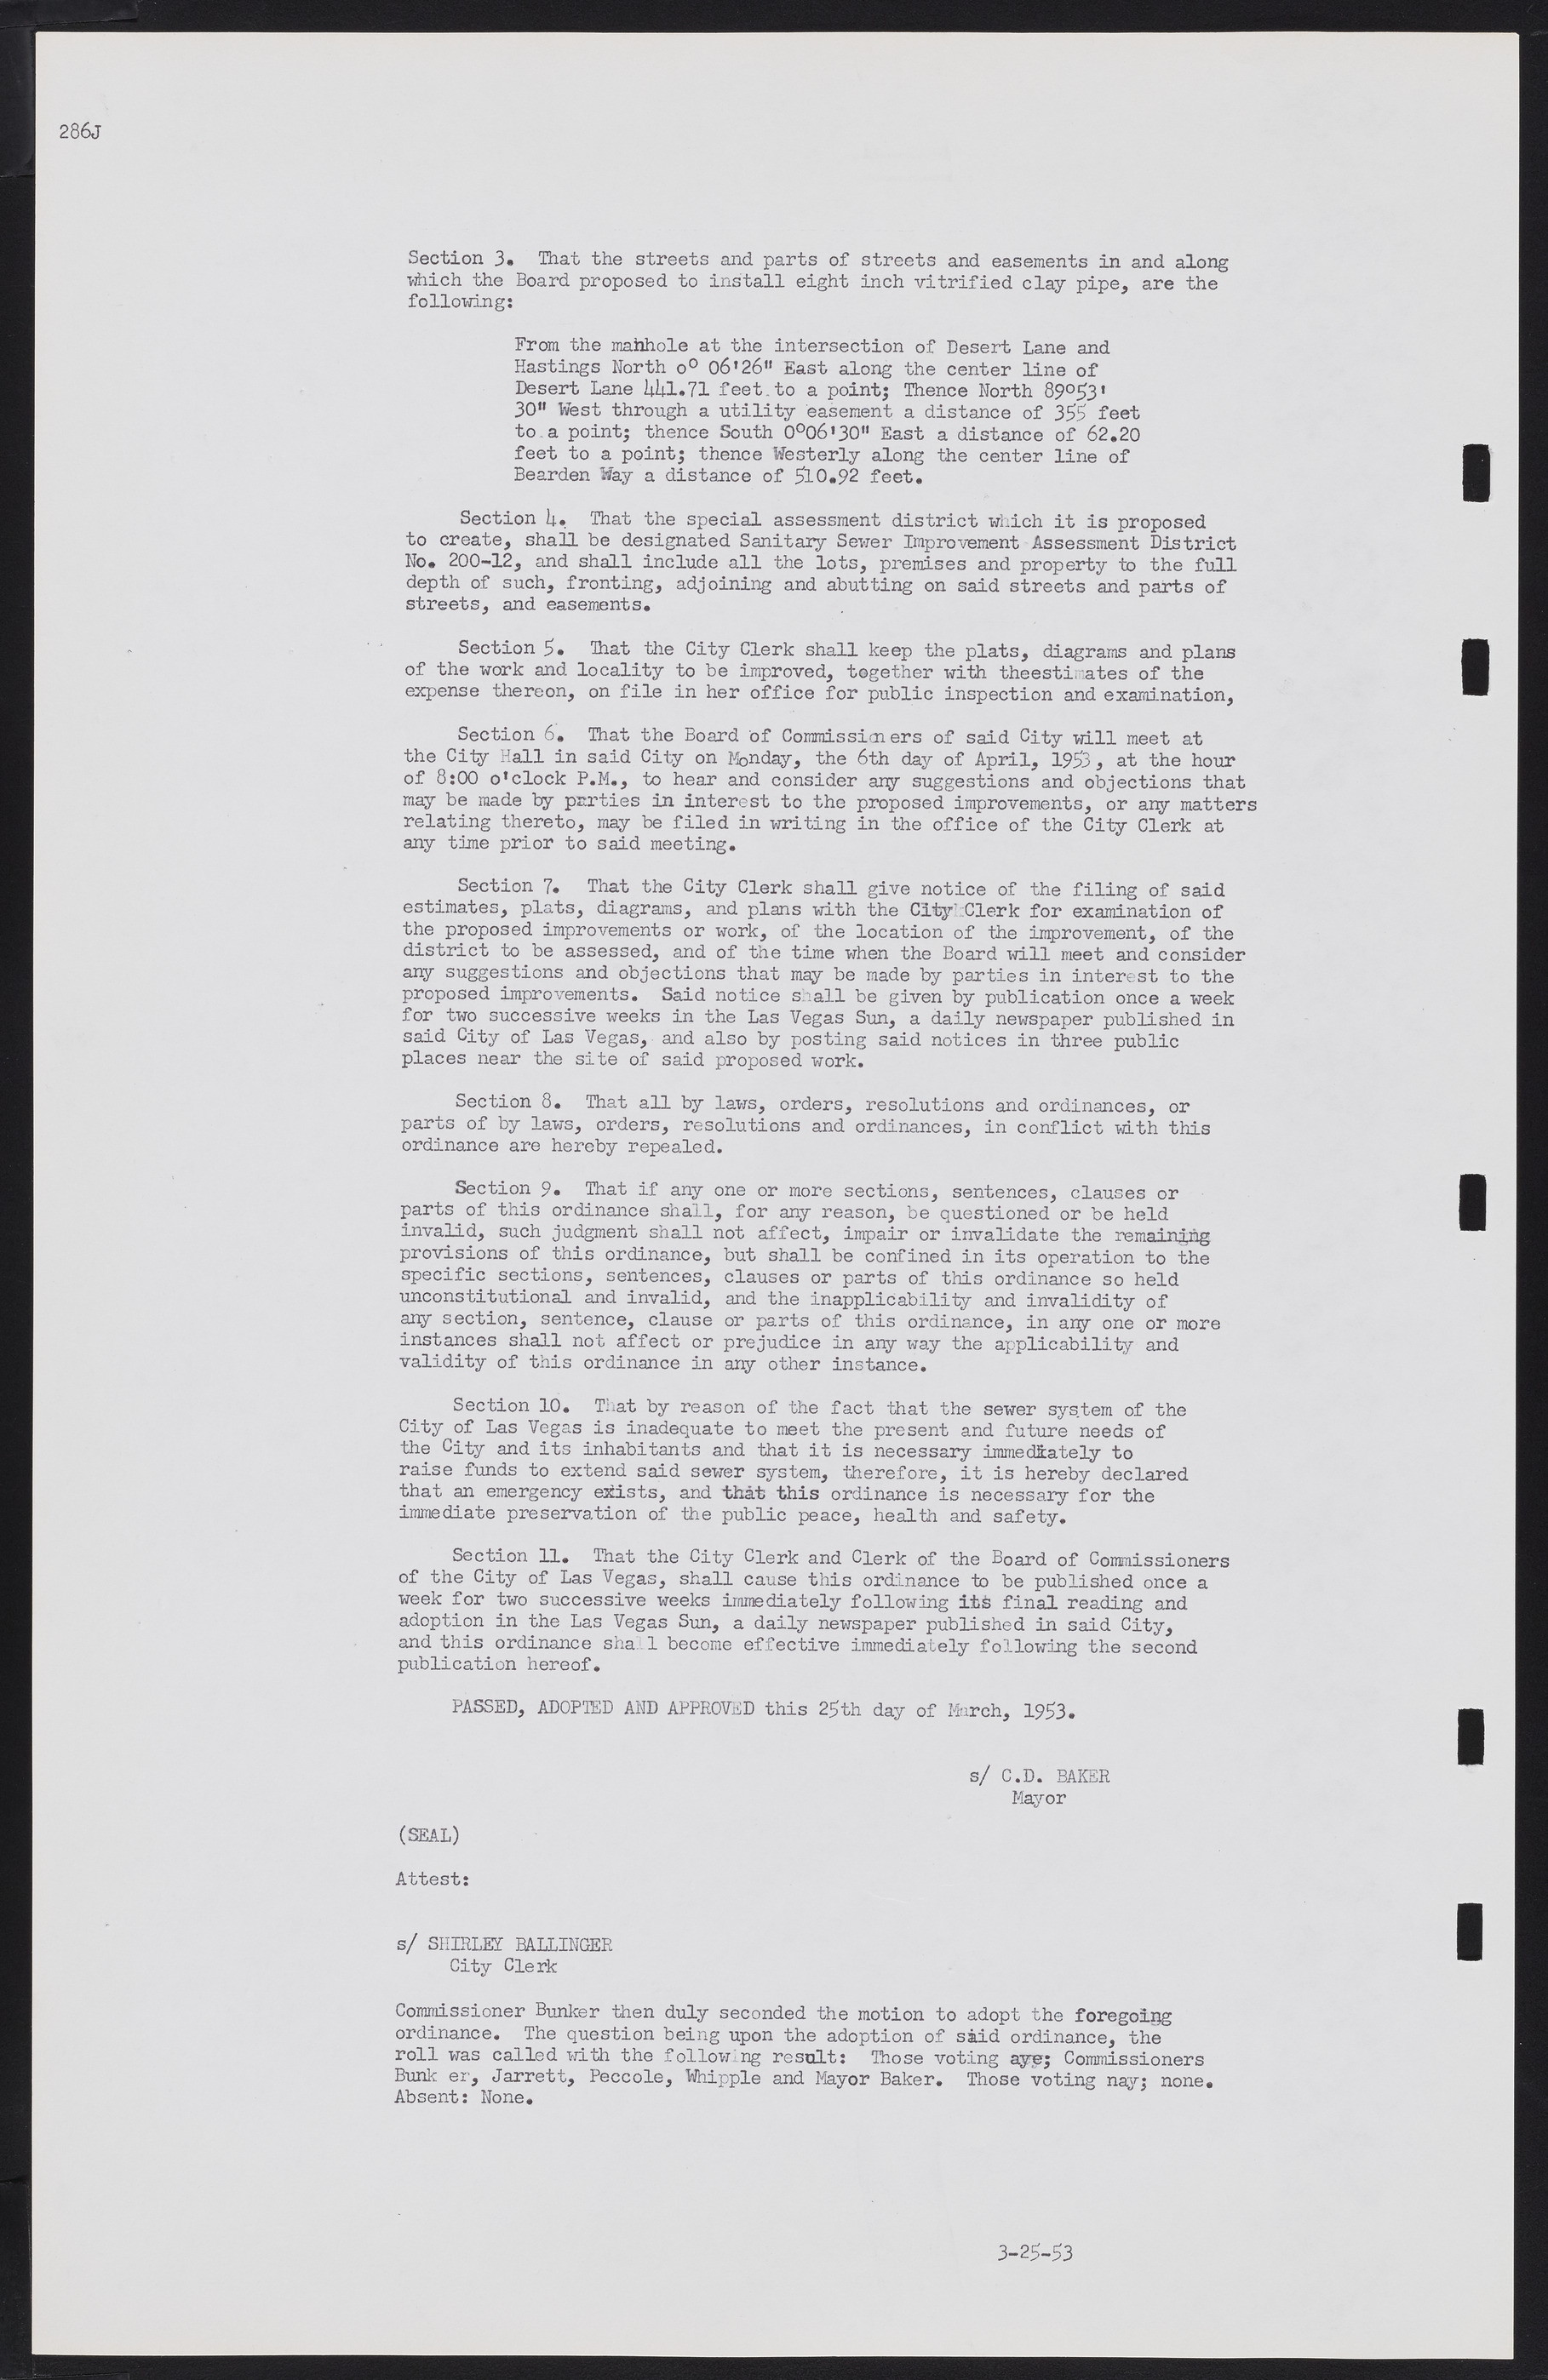 Las Vegas City Commission Minutes, May 26, 1952 to February 17, 1954, lvc000008-312